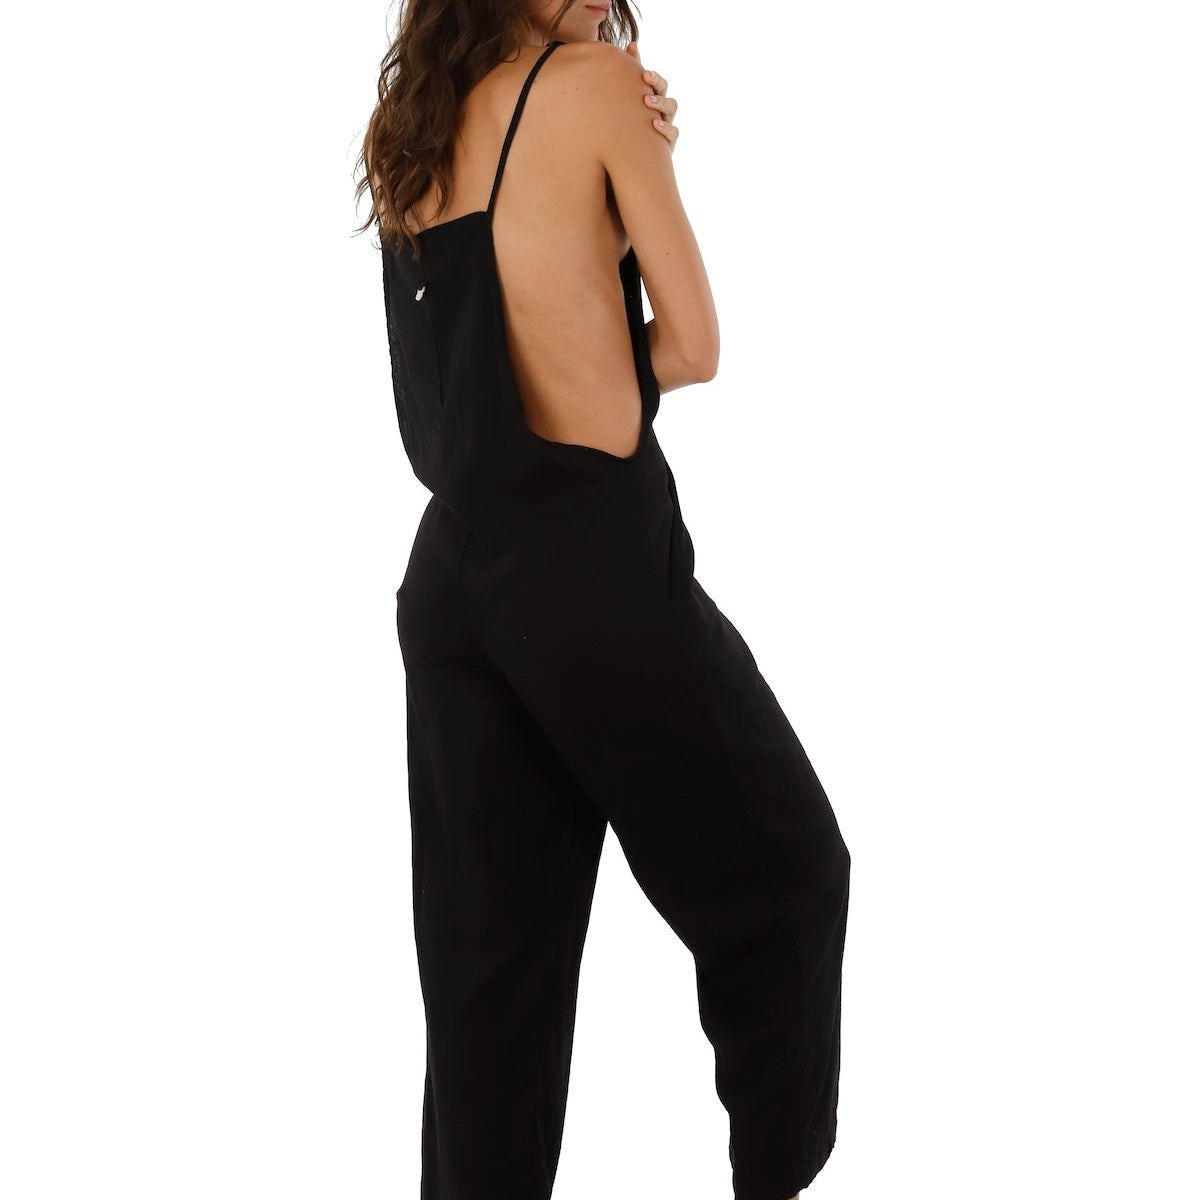 Image of a woman wearing a black jumpsuit. She's looking to the side and standing against a white background. The purpose of this image is to highlight the jumpsuit.